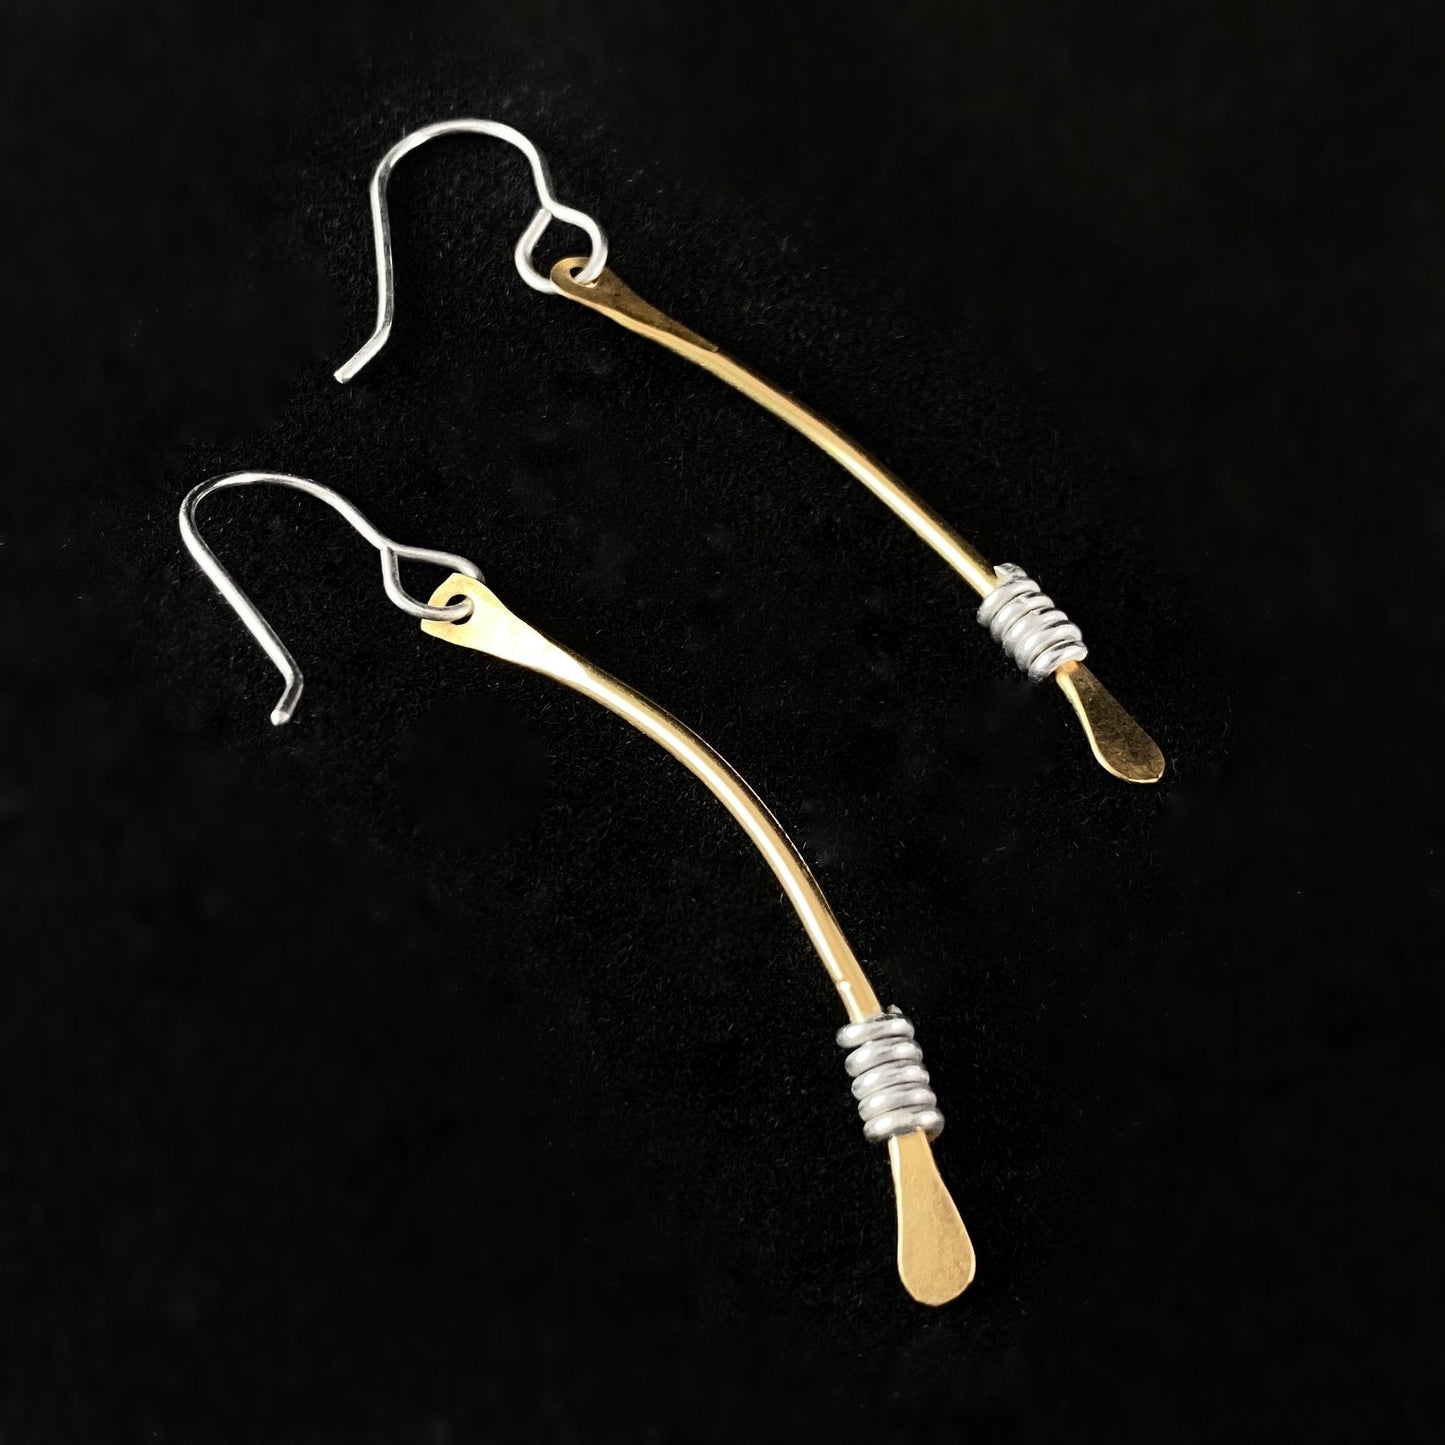 Gold Curved Bar Earrings with Silver Coils, Handmade - Recycled Materials